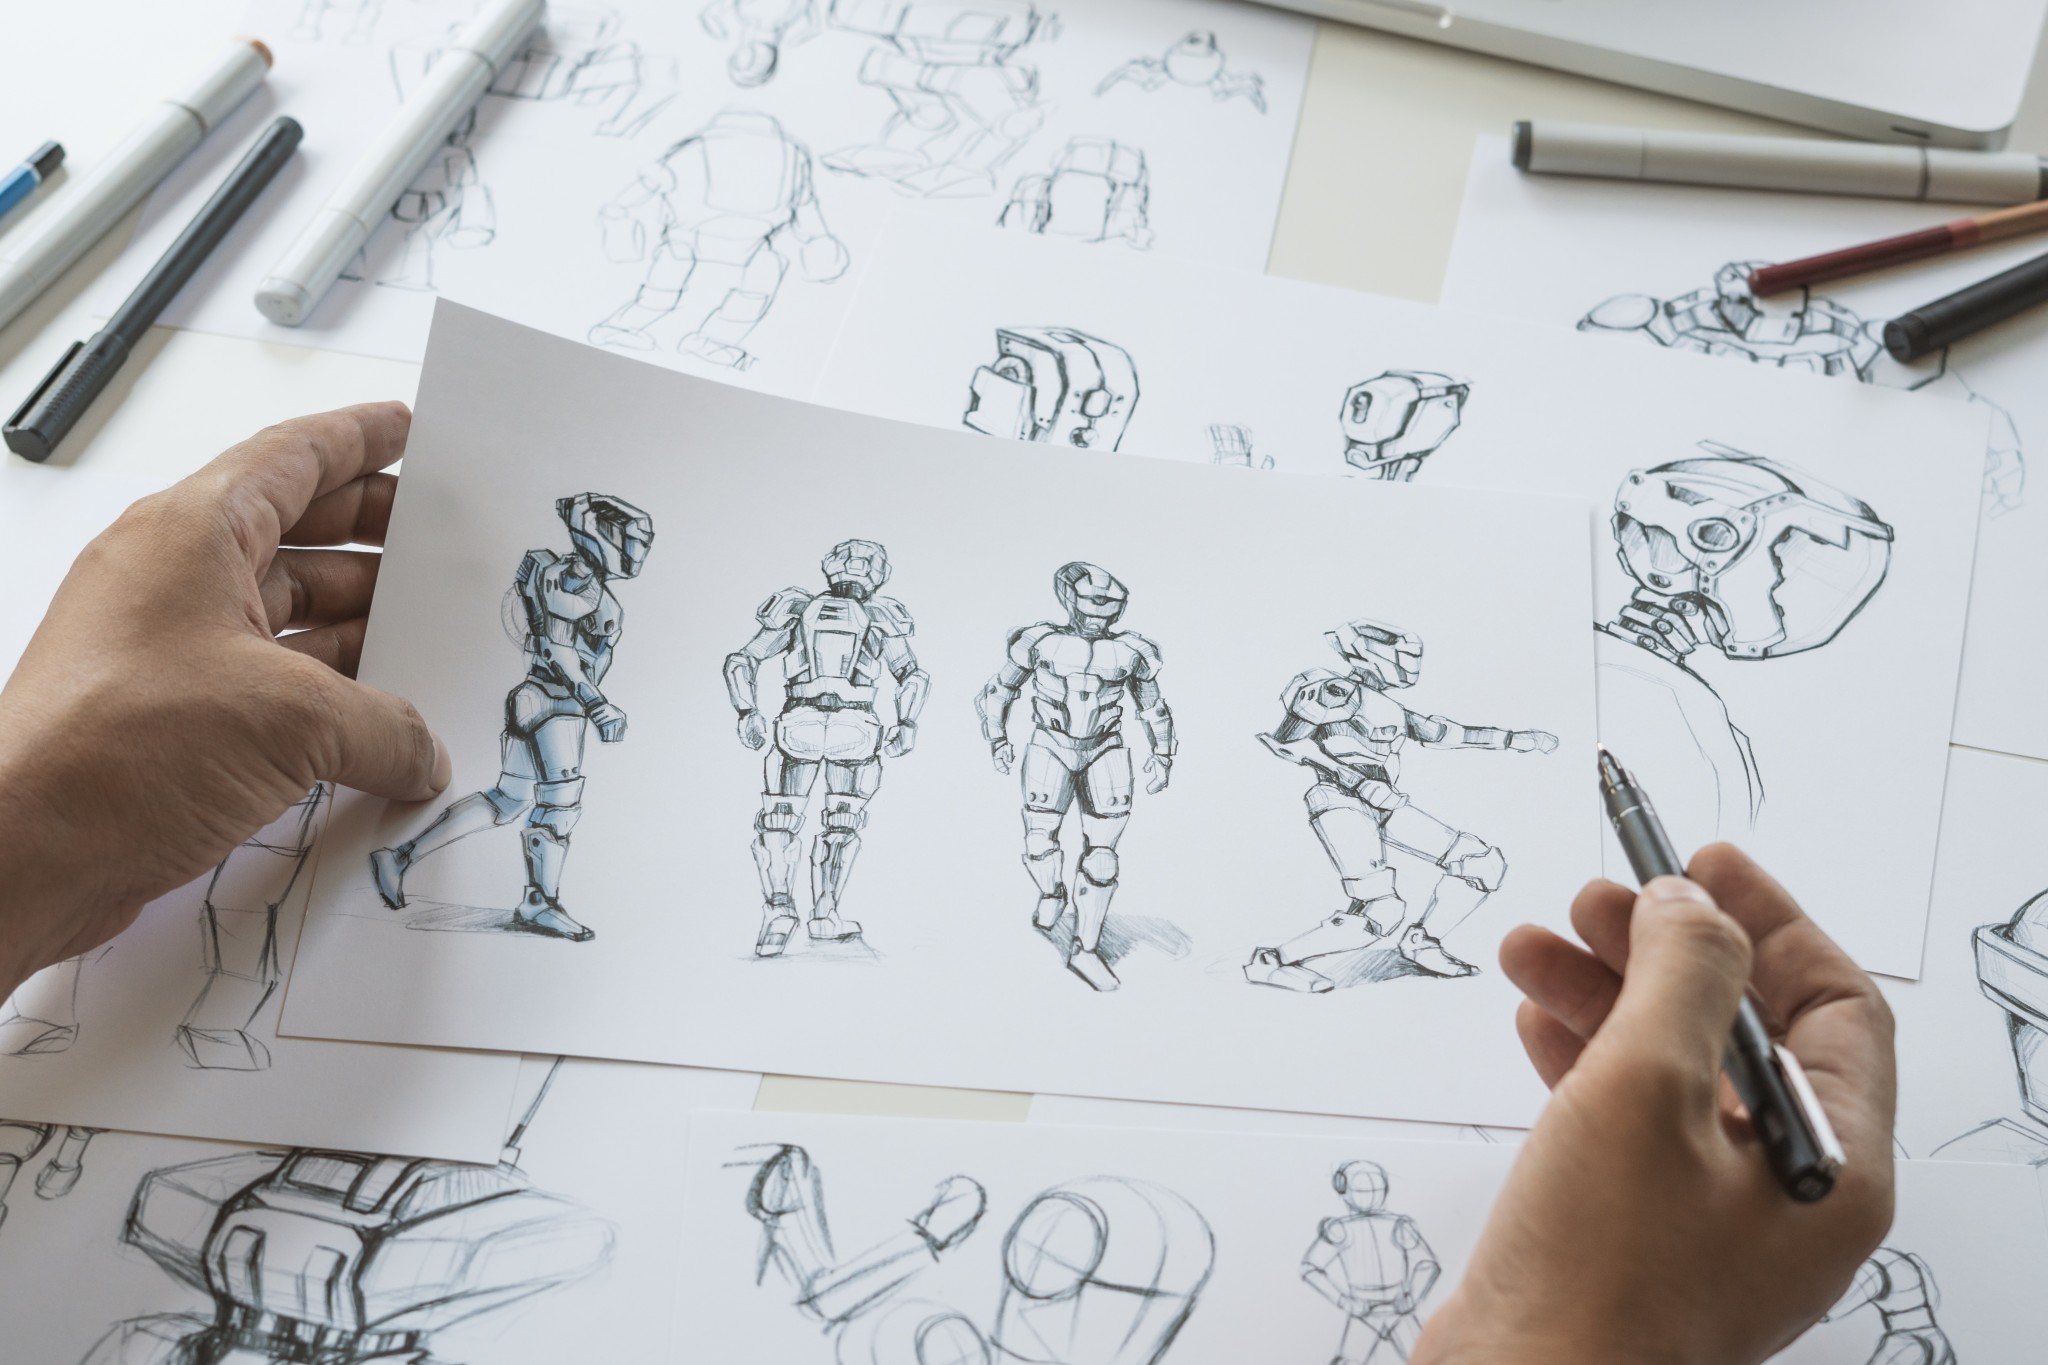 How to Become a Top Animation Artist - Storyboard Artists Guide